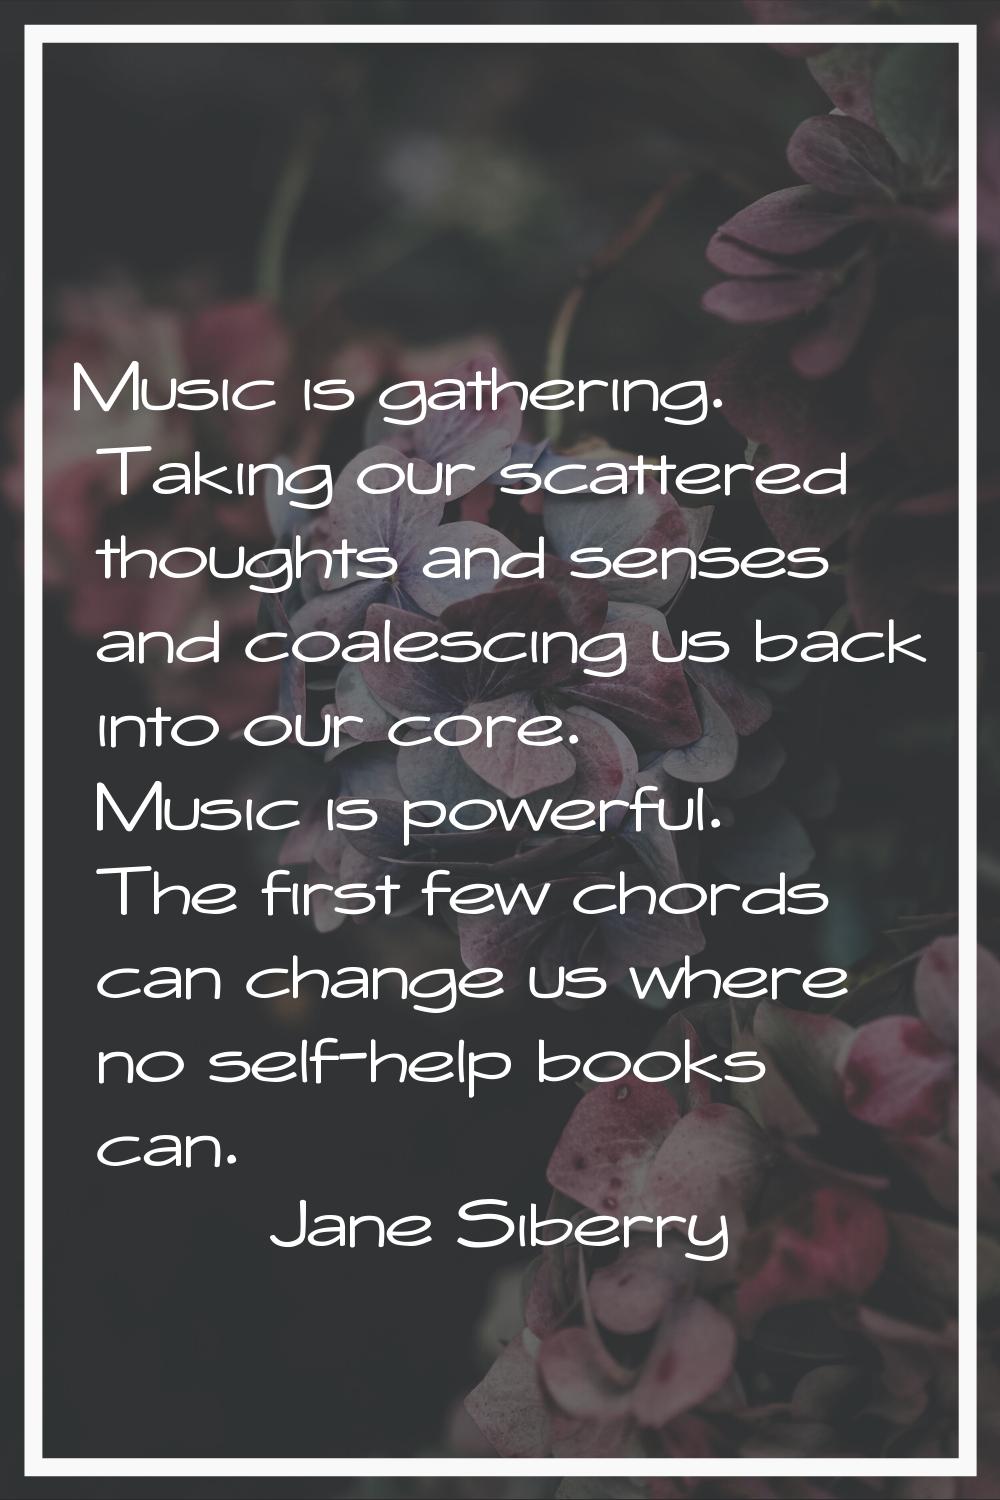 Music is gathering. Taking our scattered thoughts and senses and coalescing us back into our core. 